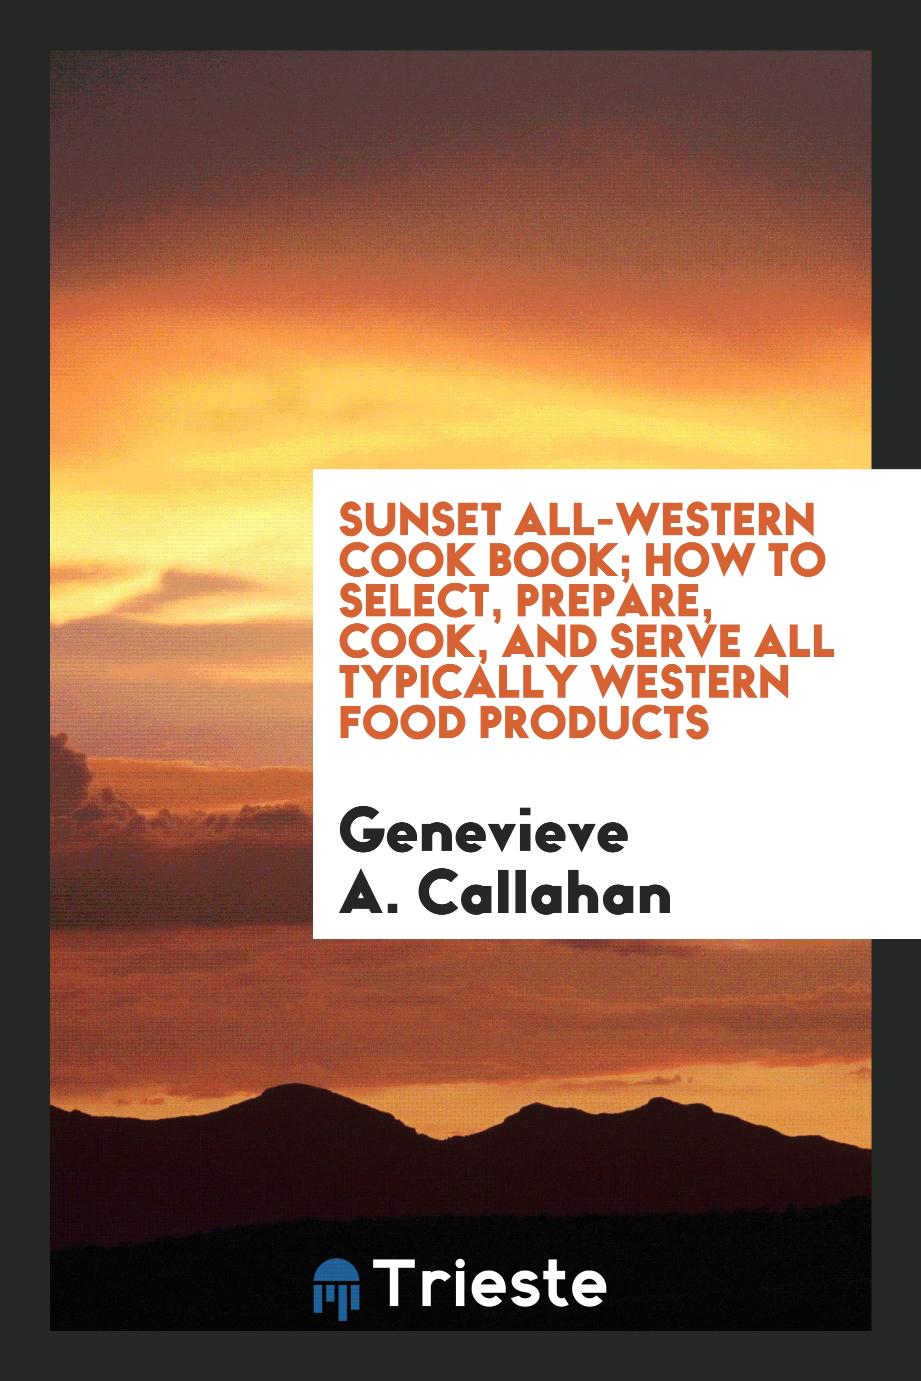 Sunset all-western cook book; how to select, prepare, cook, and serve all typically western food products